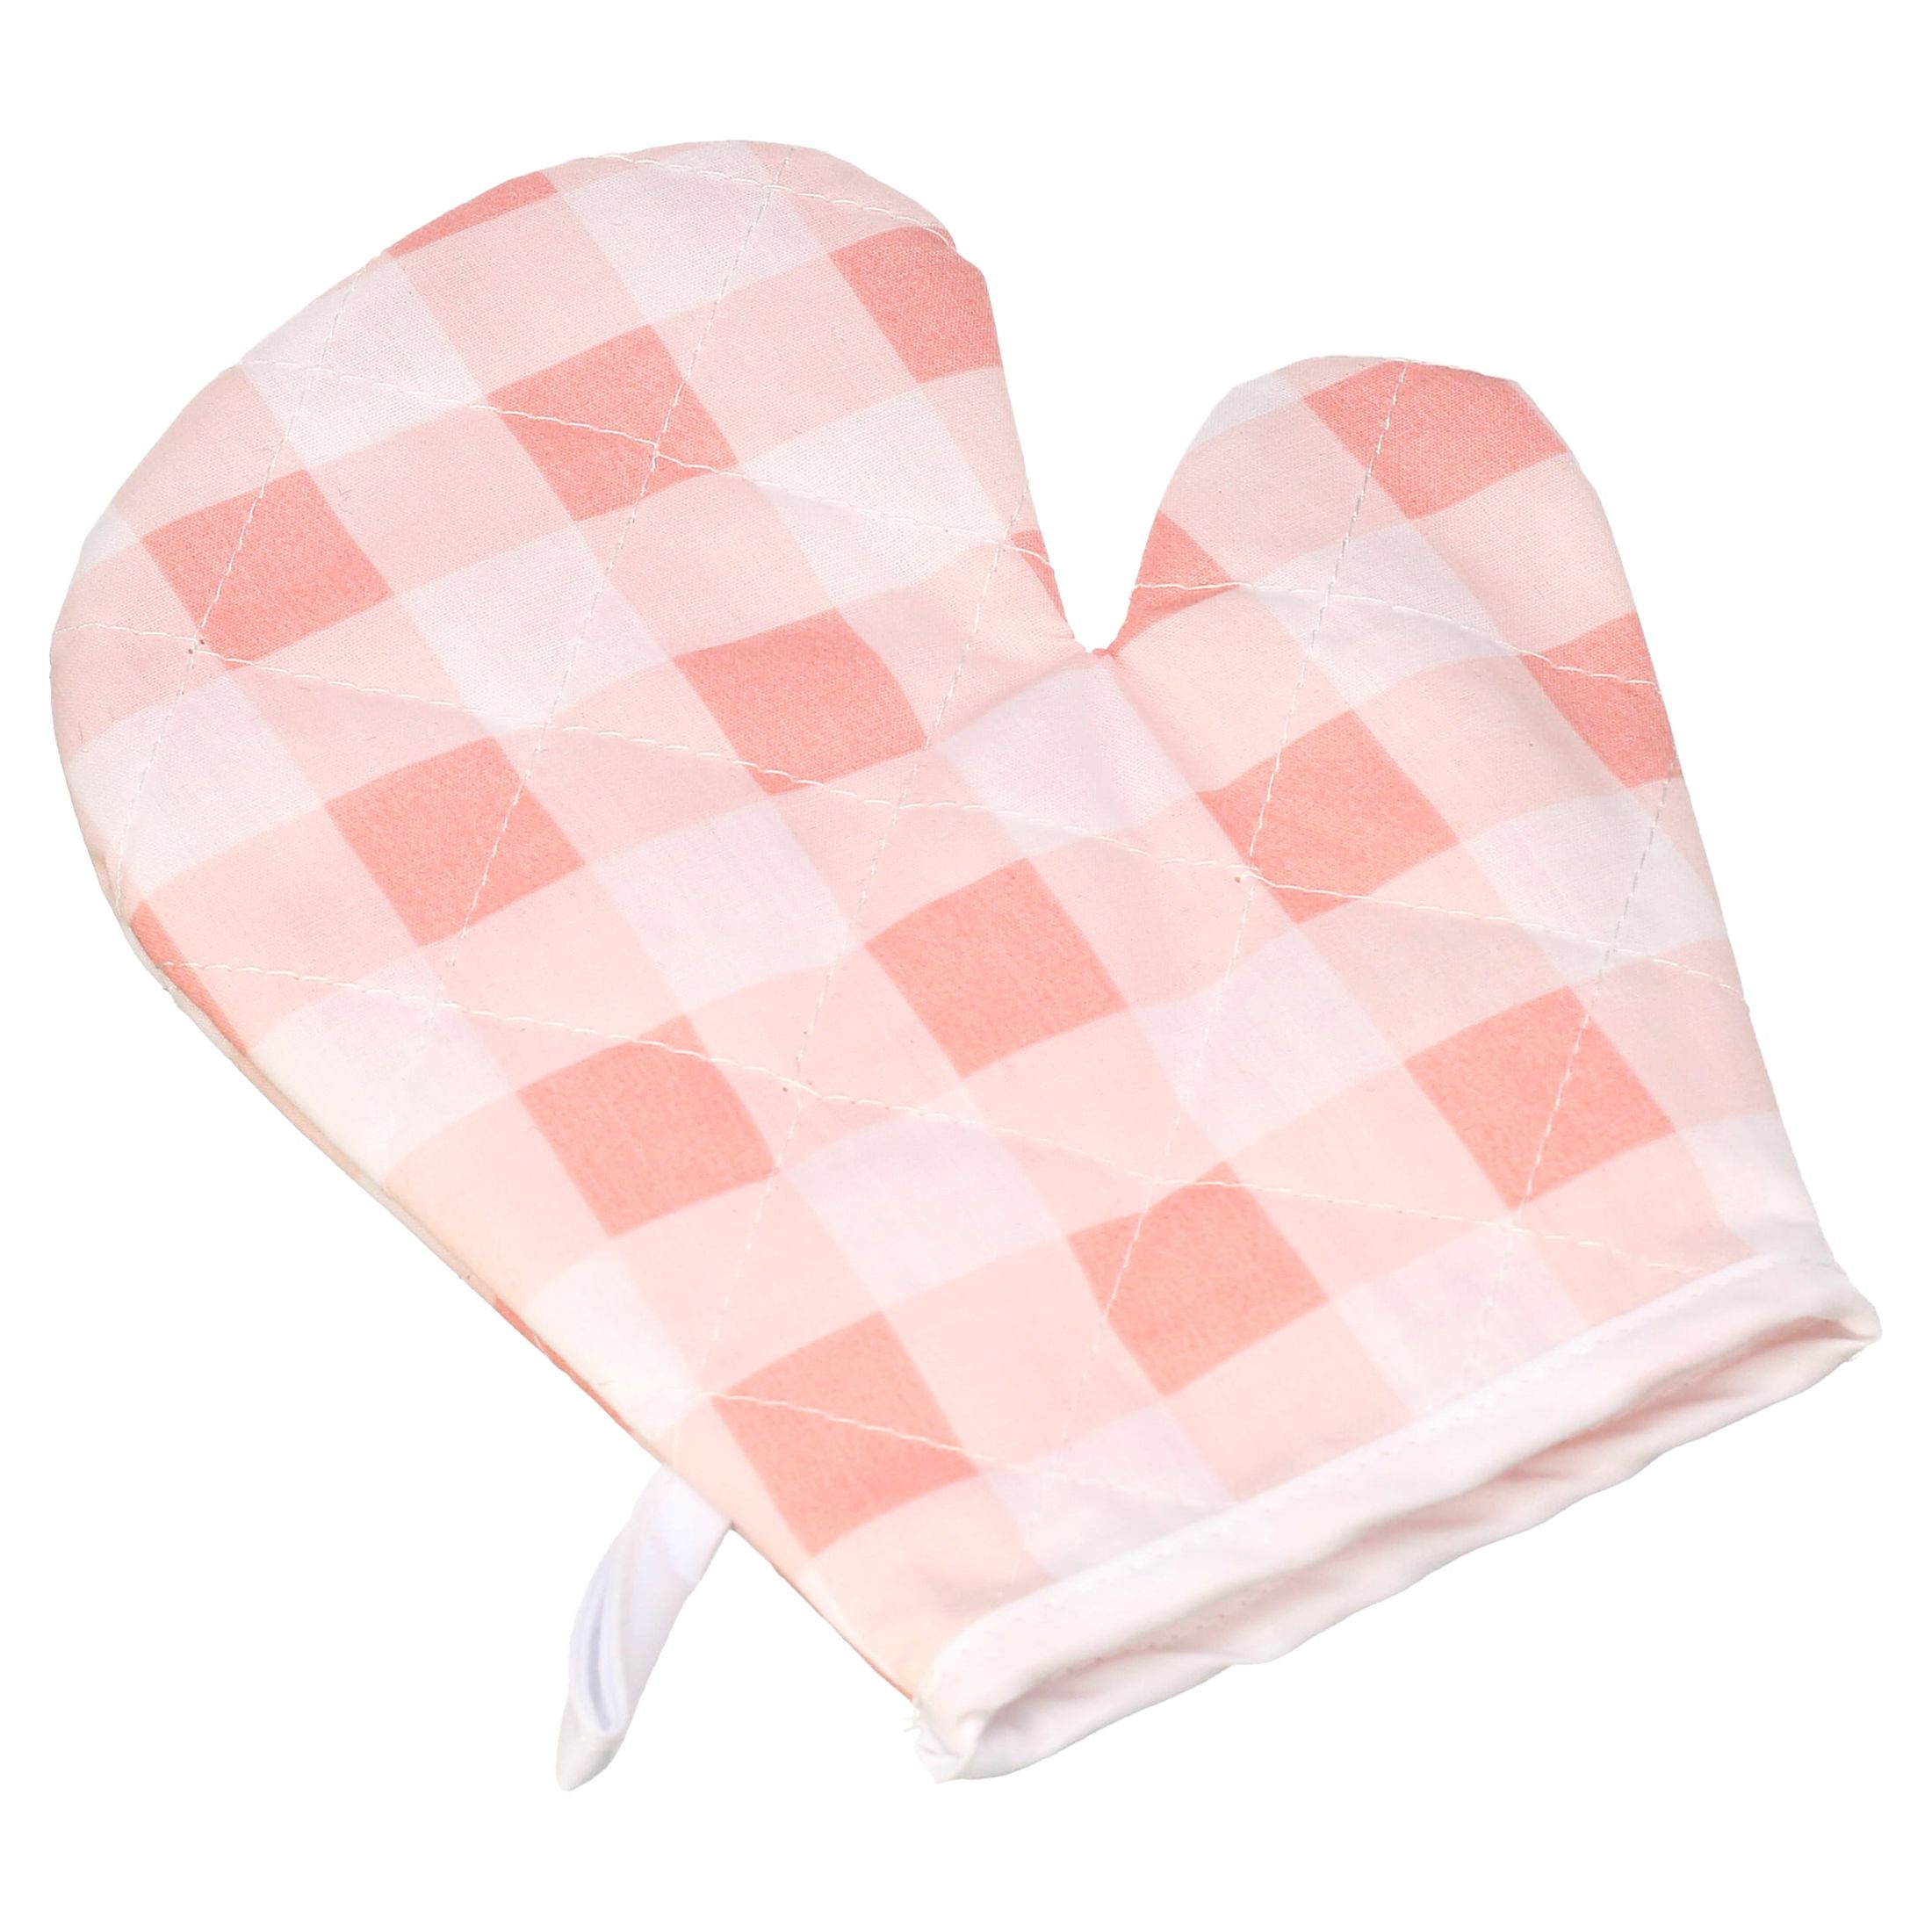 KidKraft Tasty Treats Chef Apron, Hat and Accessory Set for Kids, Pink - image 5 of 8